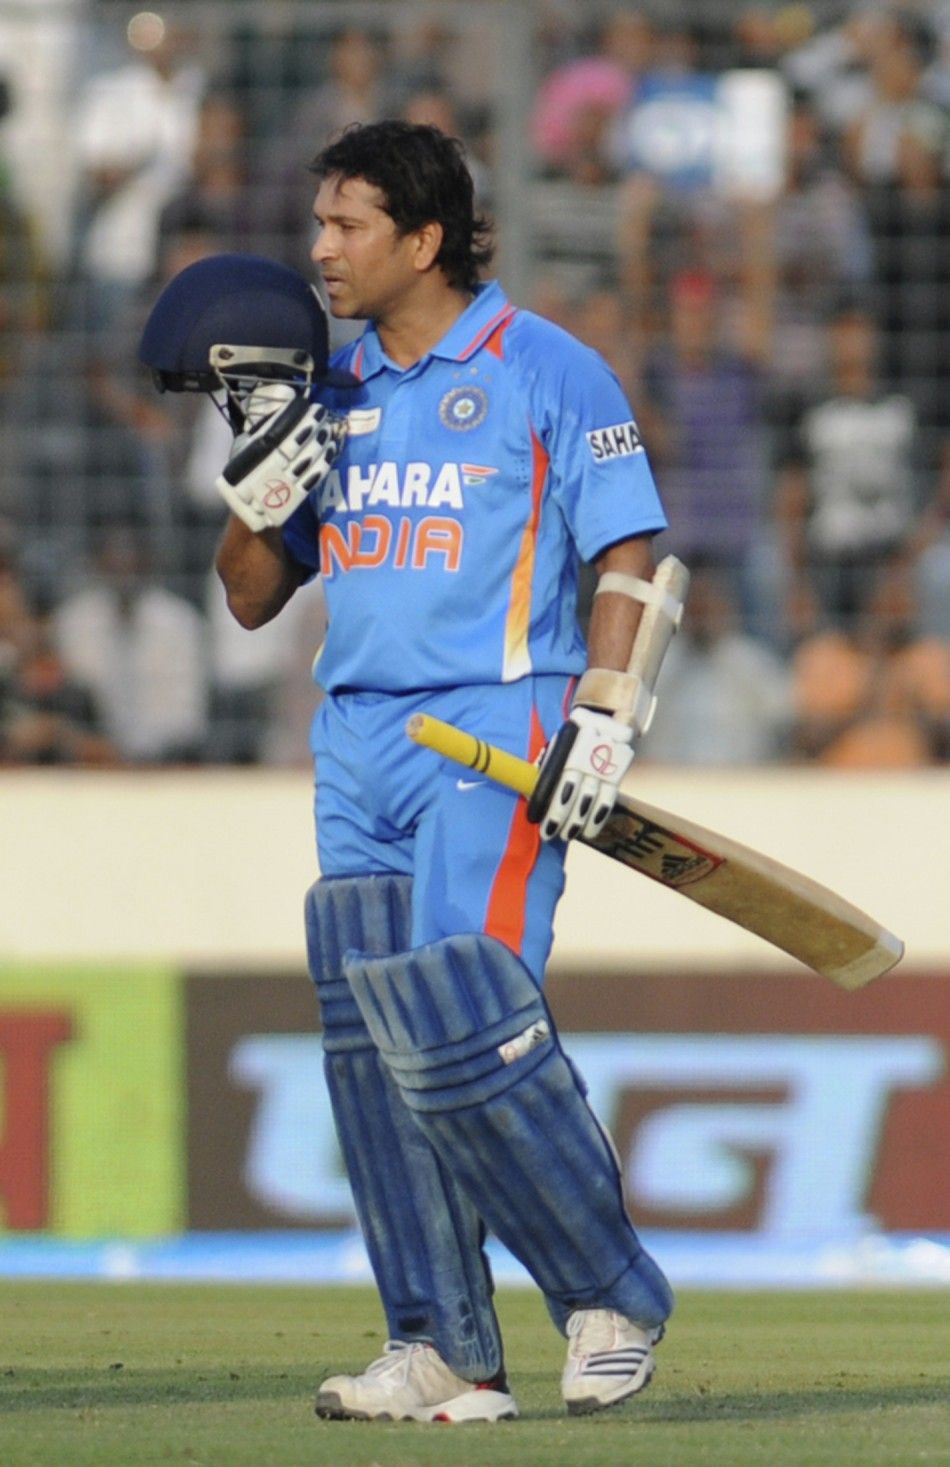 Indias Sachin Tendulkar celebrates after he scored his 100th international centuries against Bangladesh during their One Day International ODI cricket match of Asia Cup in Dhaka March 16, 2012.